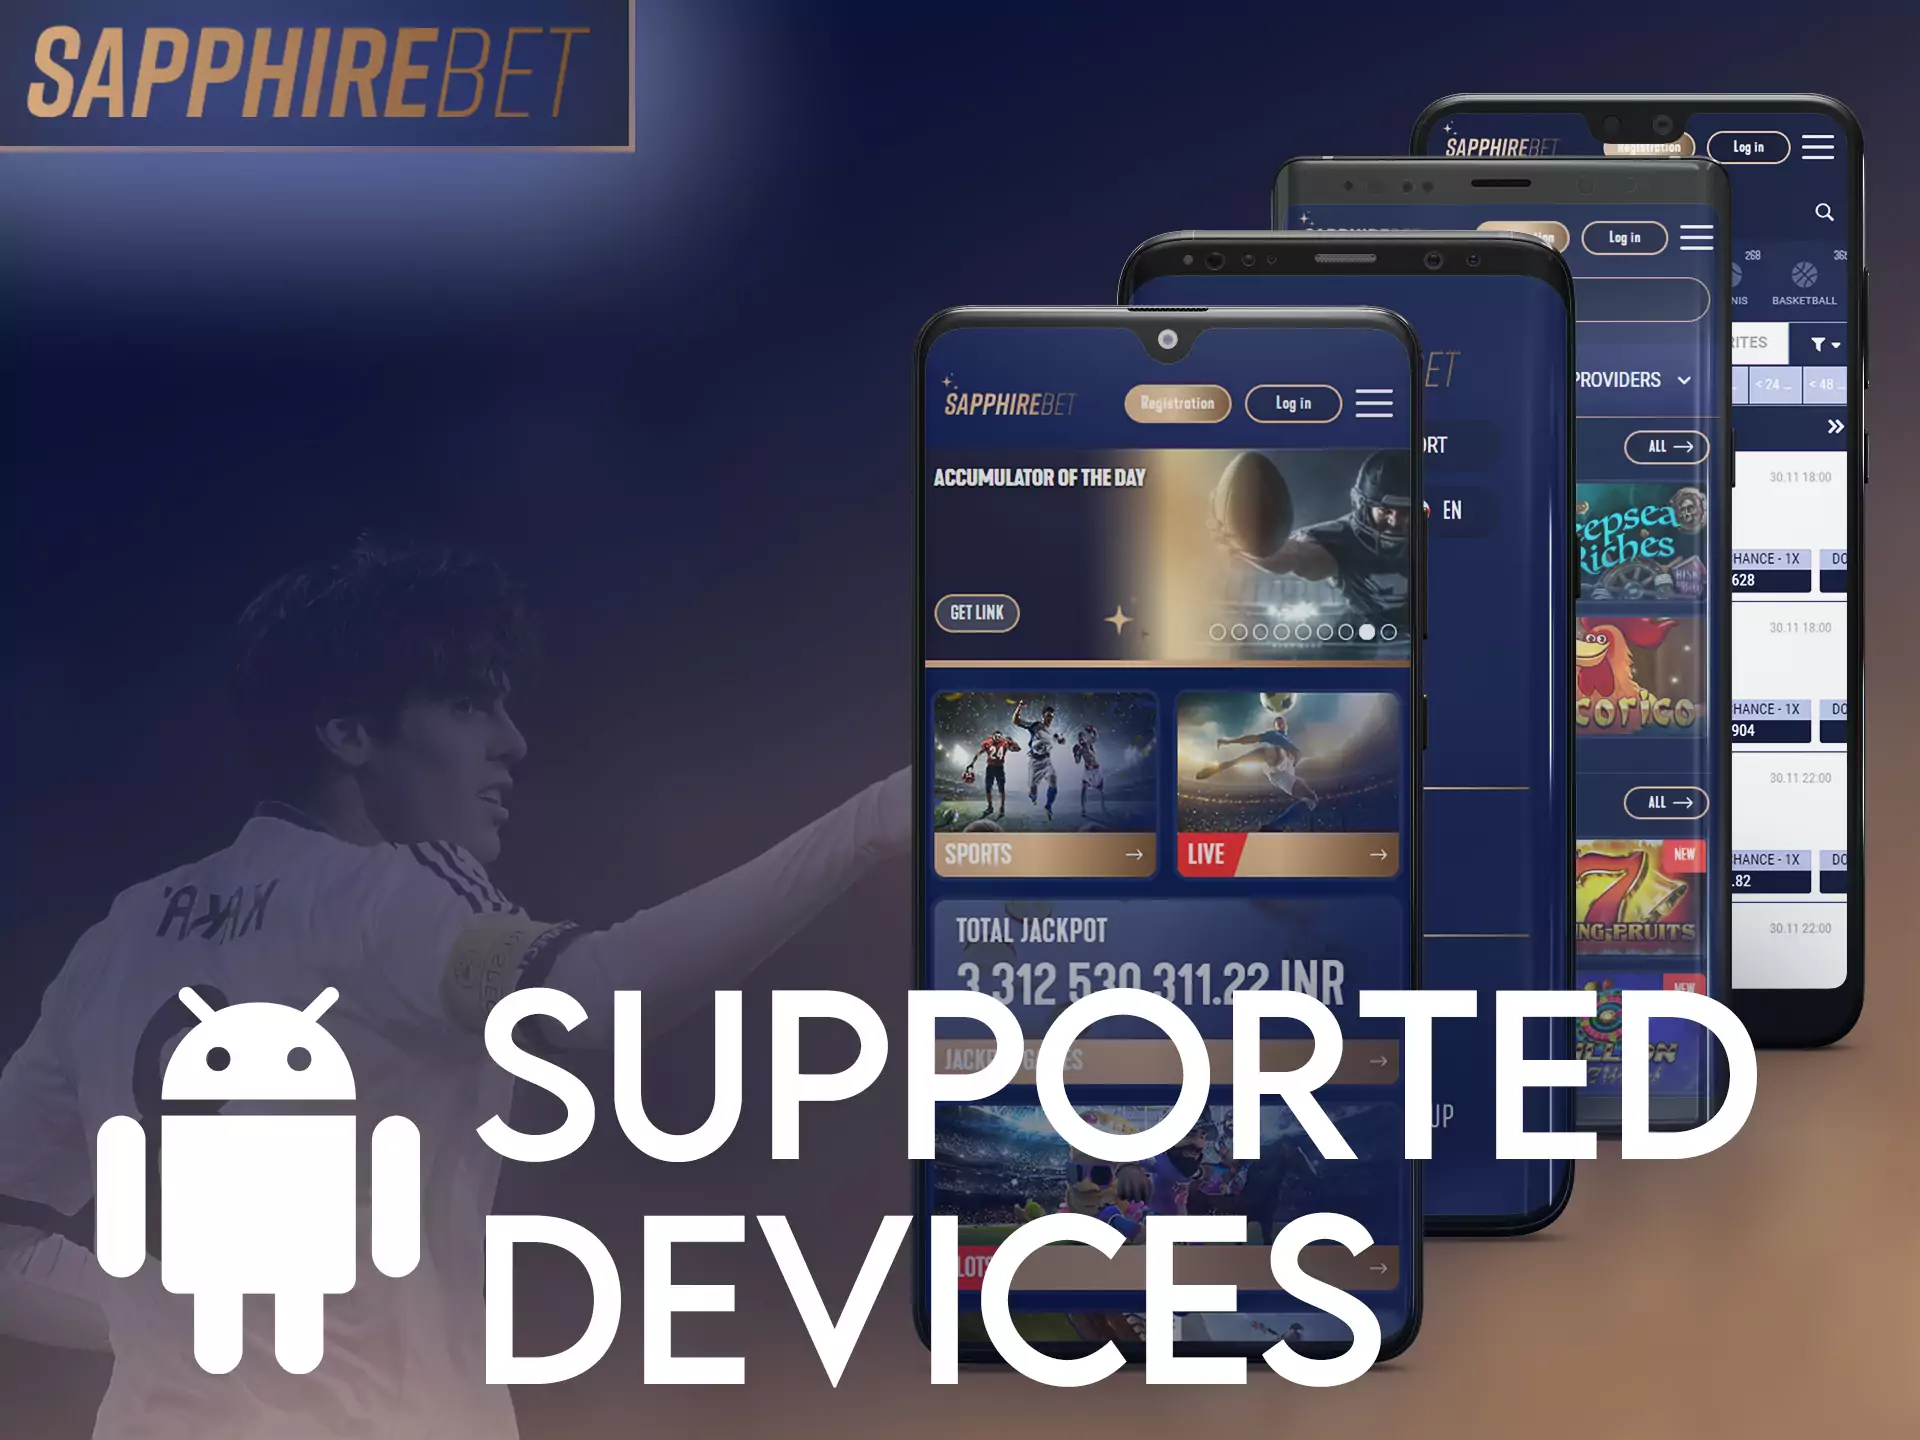 The Sapphirebet application is supported on various Android devices, yours will definitely be on this list.